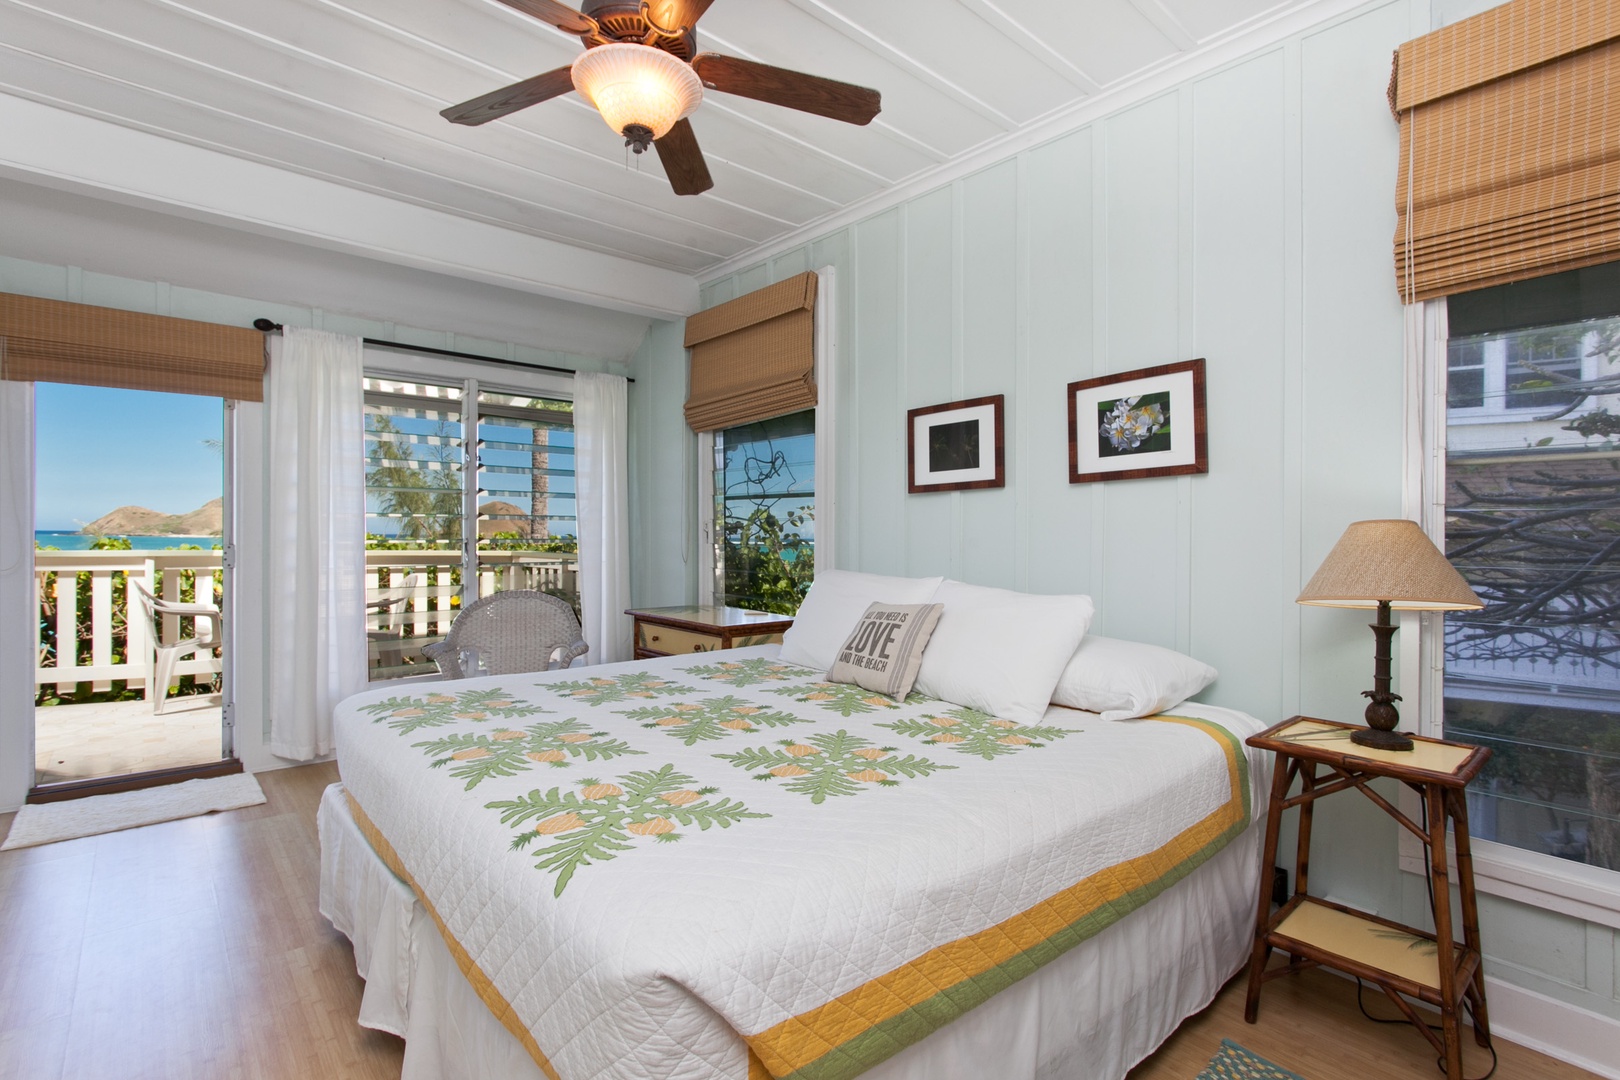 Kailua Vacation Rentals, Lanikai Village* - Hale Kainalu: Guest bedroom with a king bed, double futon and access to the lanai.